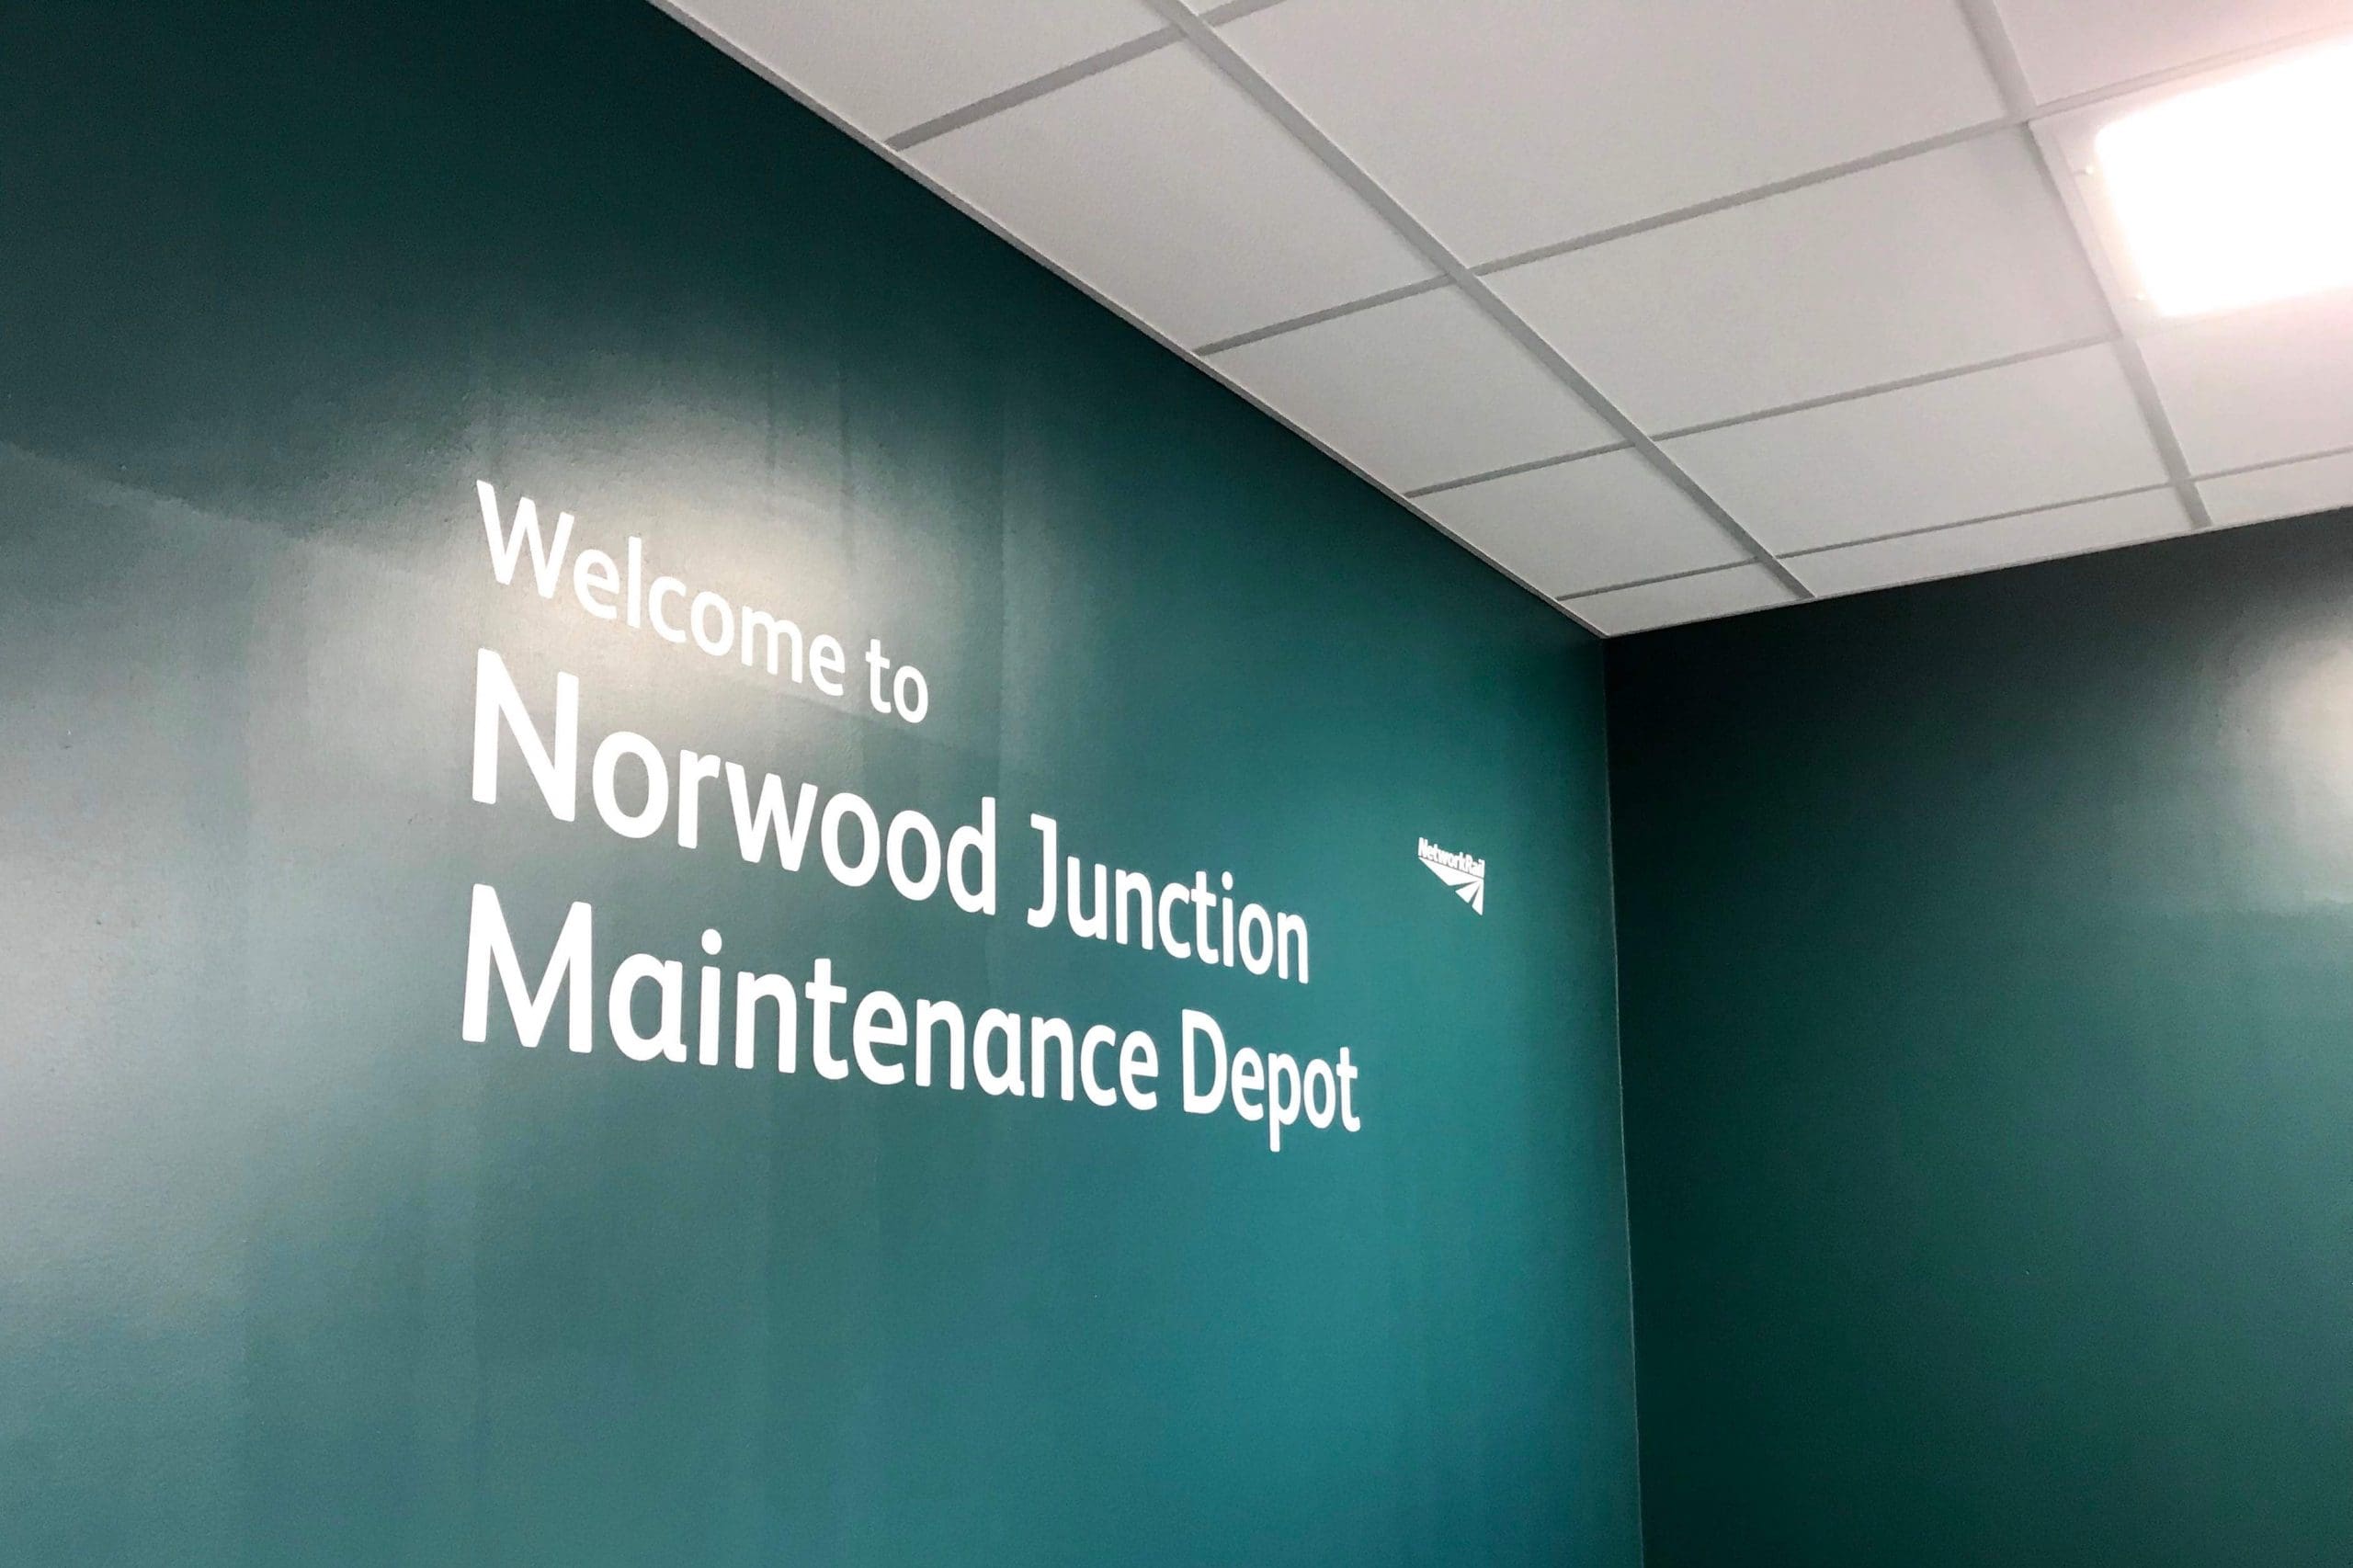 Norwood junction maintenance depot welcome wall where large commercial air conditioning solution by SubCool FM